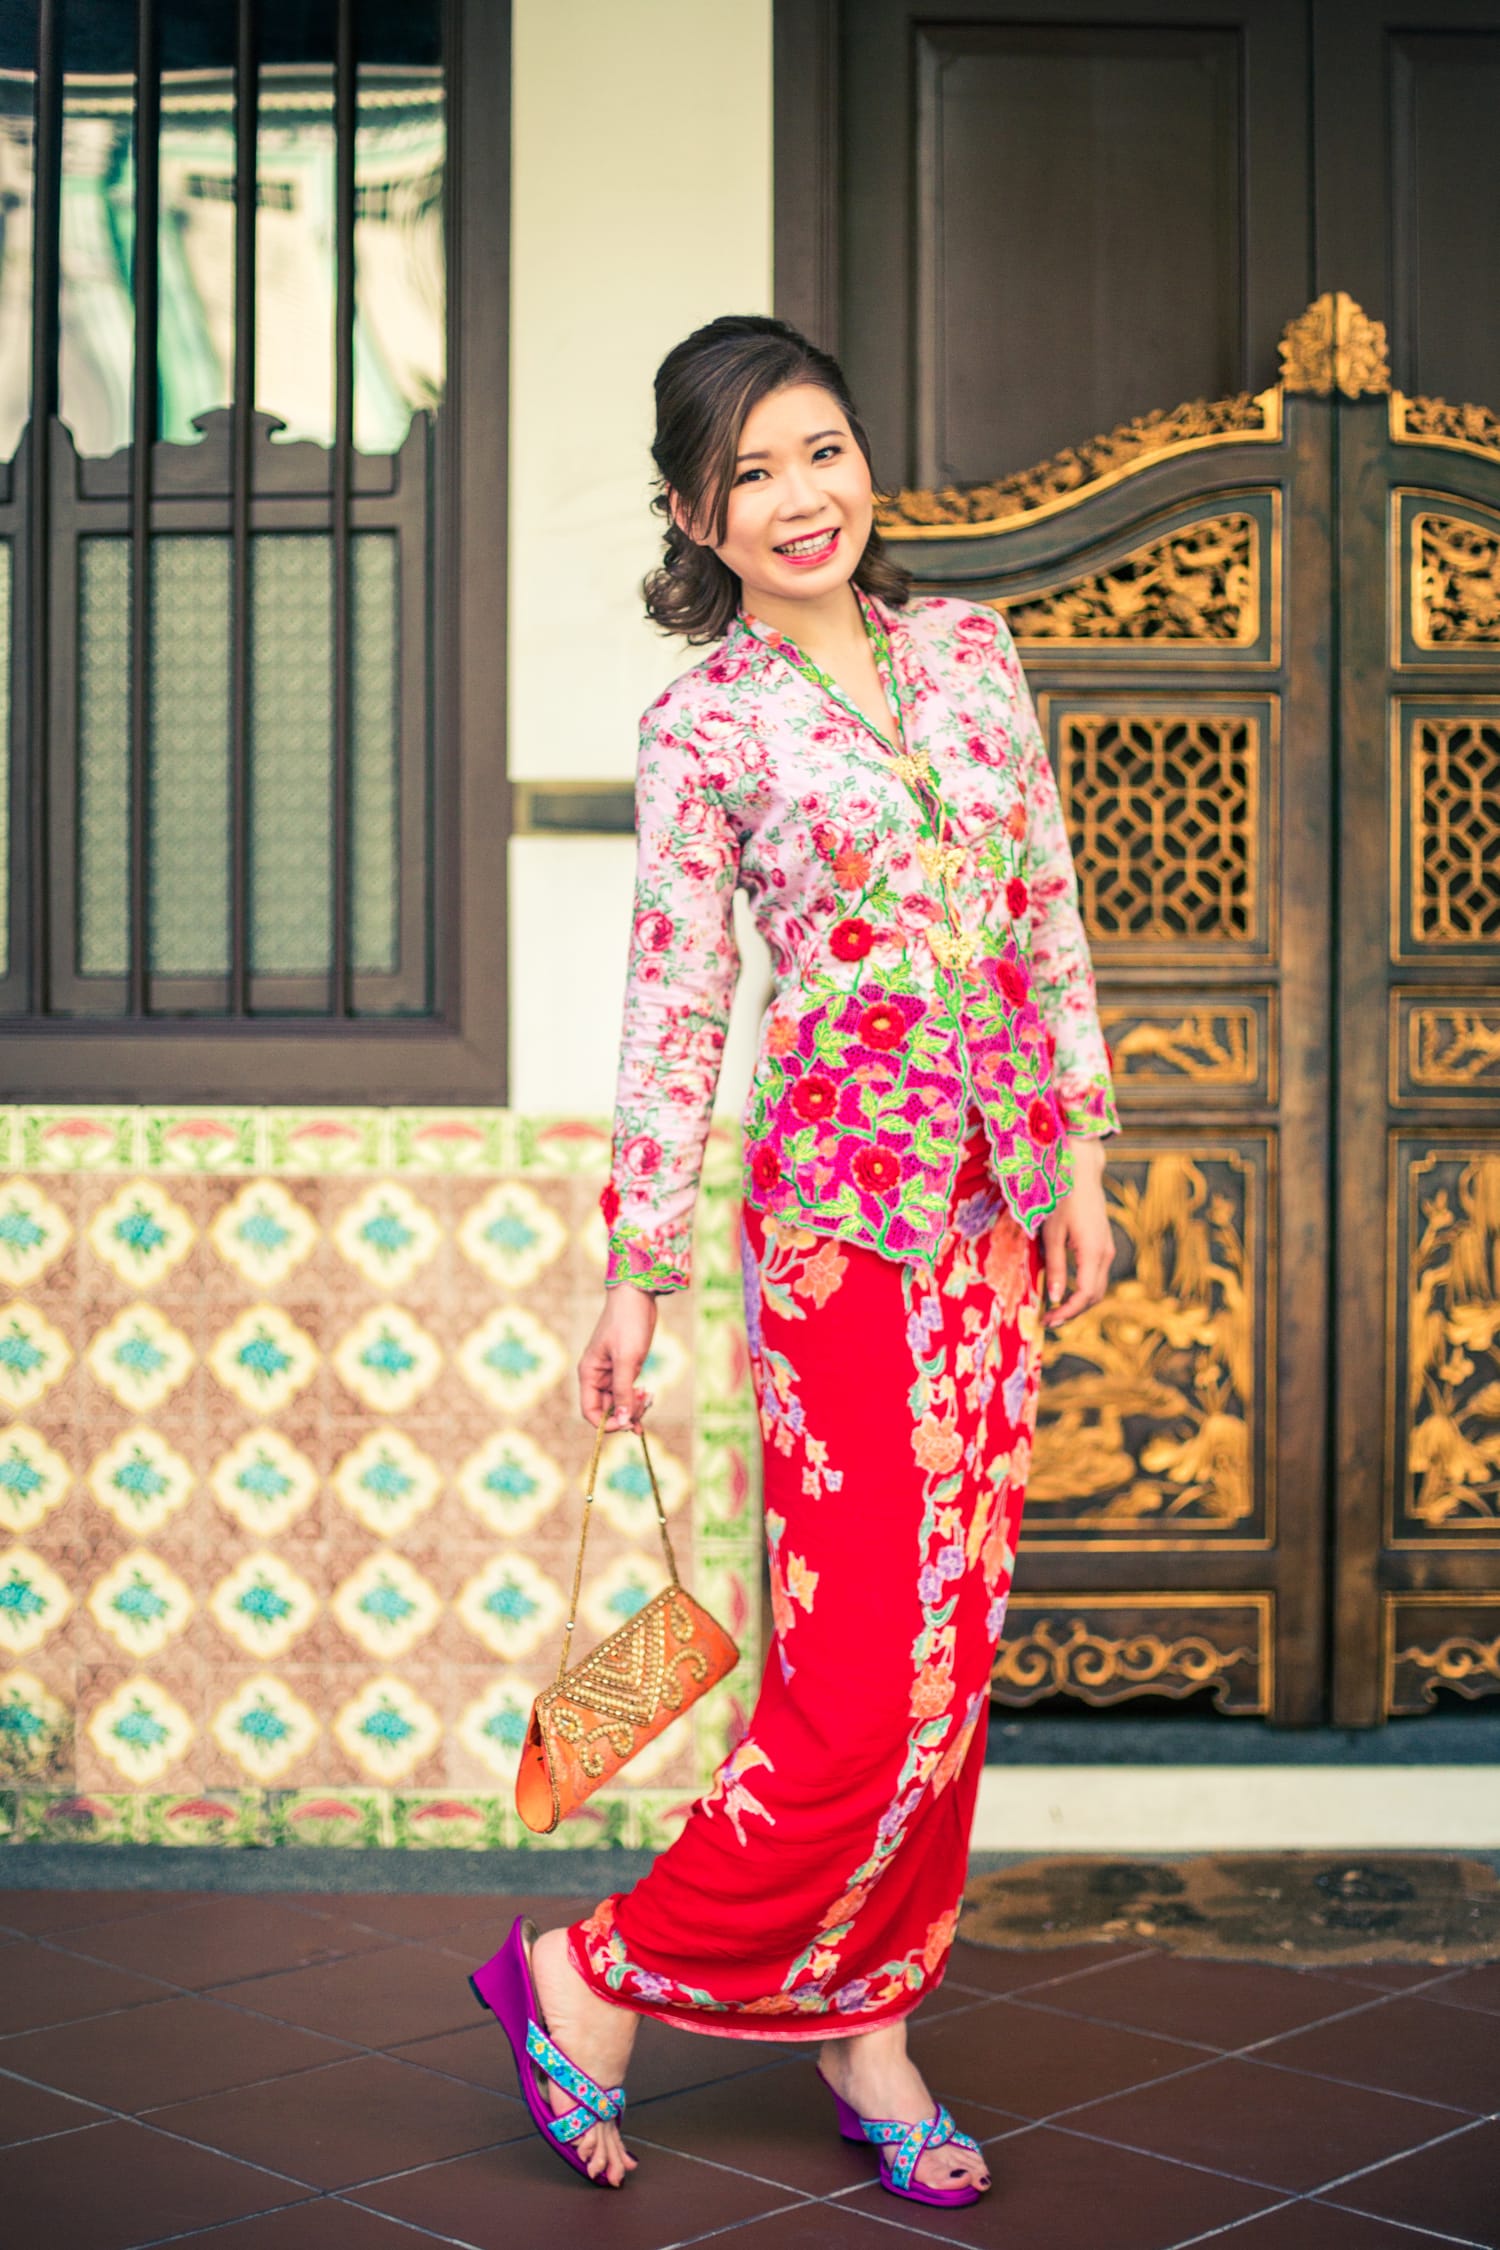 A woman in a traditional pink and red Peranakan costume poses outside a Peranakan museum during a professional indoor photo shoot in Singapore